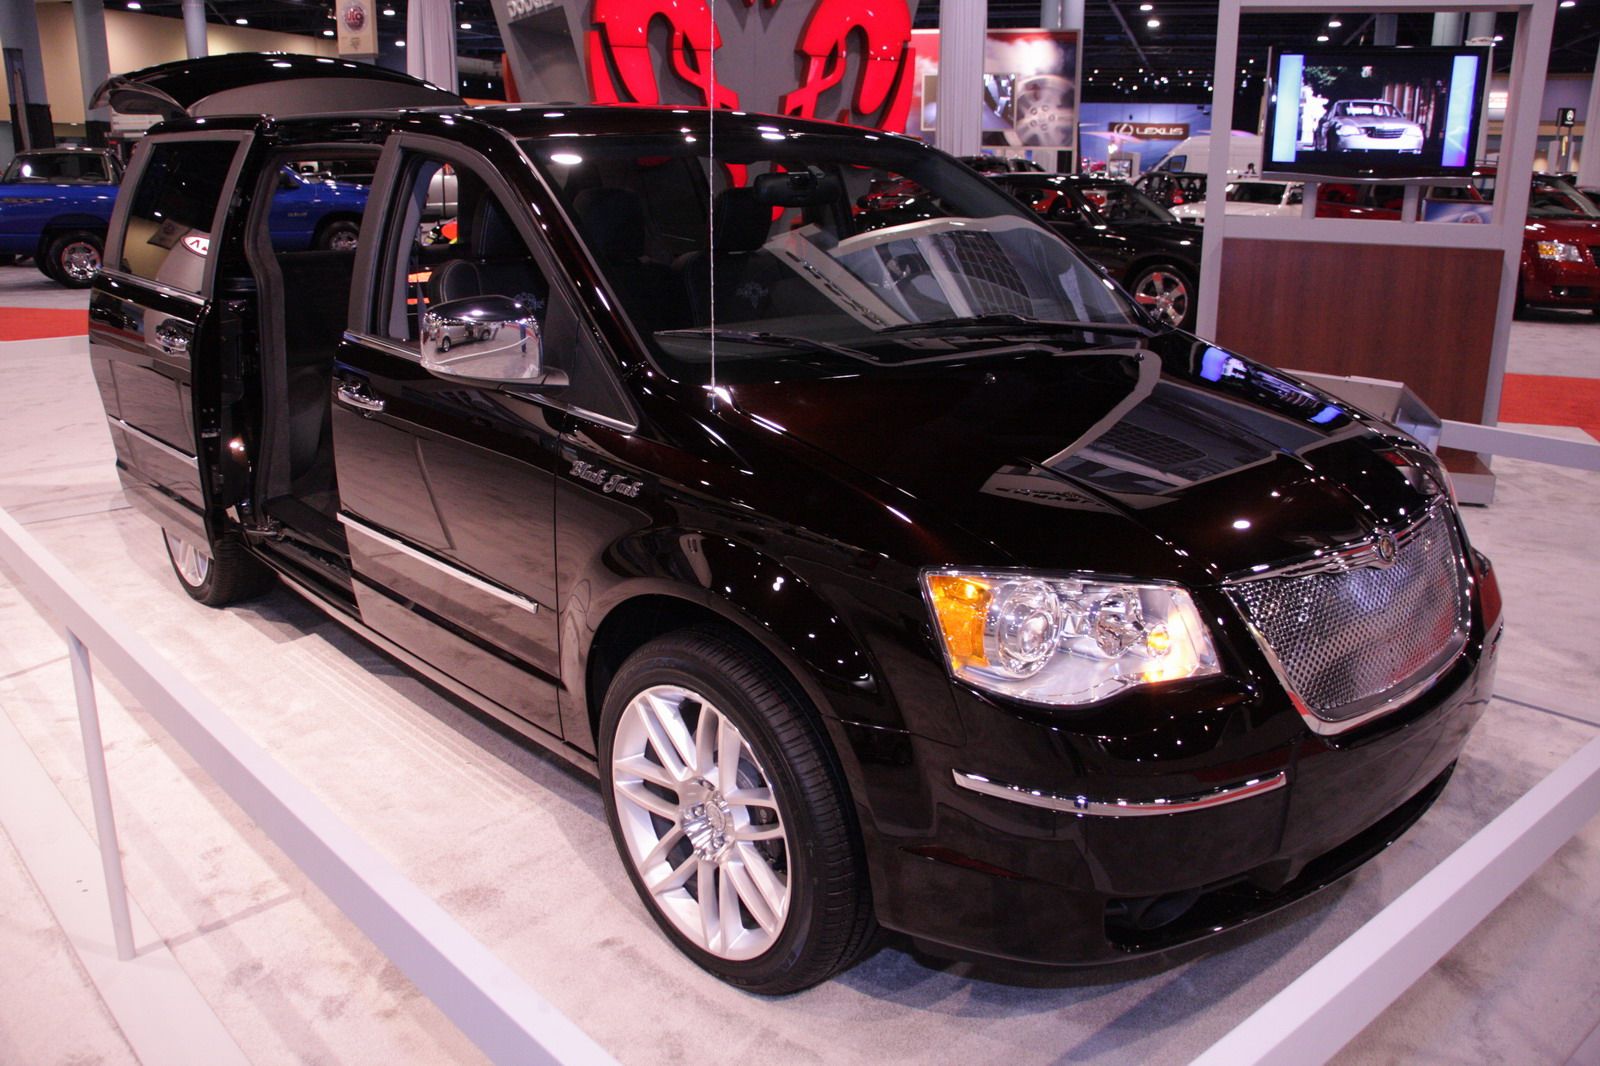 2008 Chrysler Town and Country Black Jack